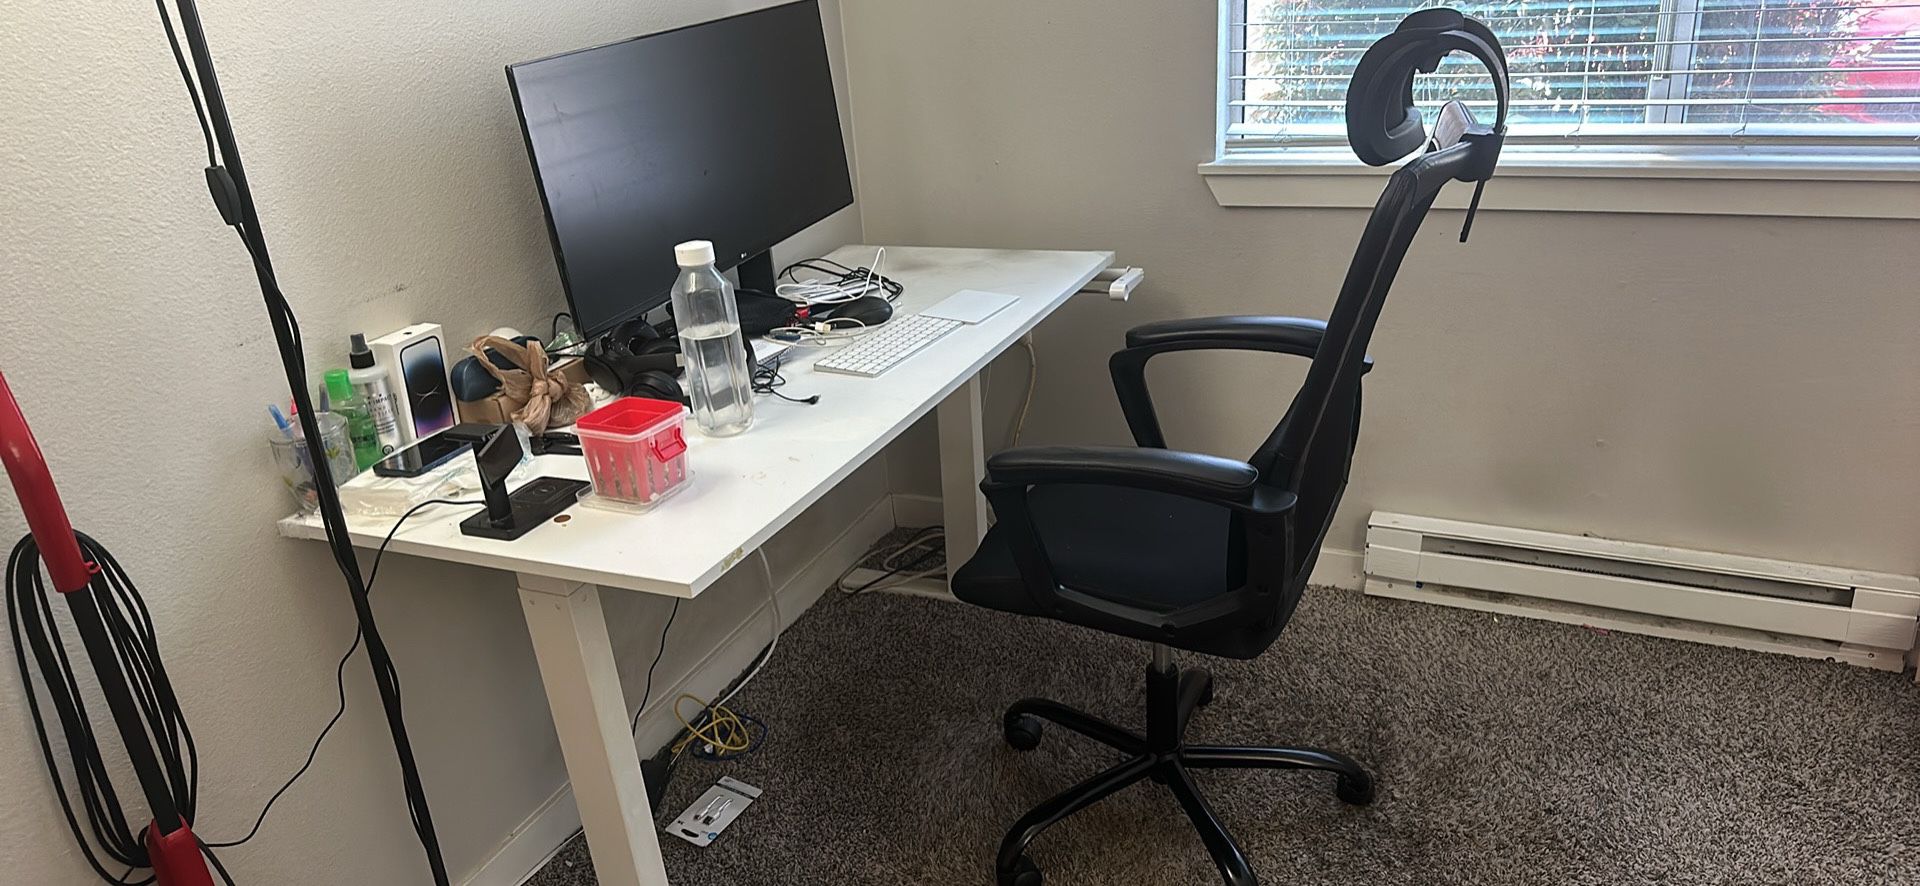 Computer Desk ( Height Adjustable)And Chair set  